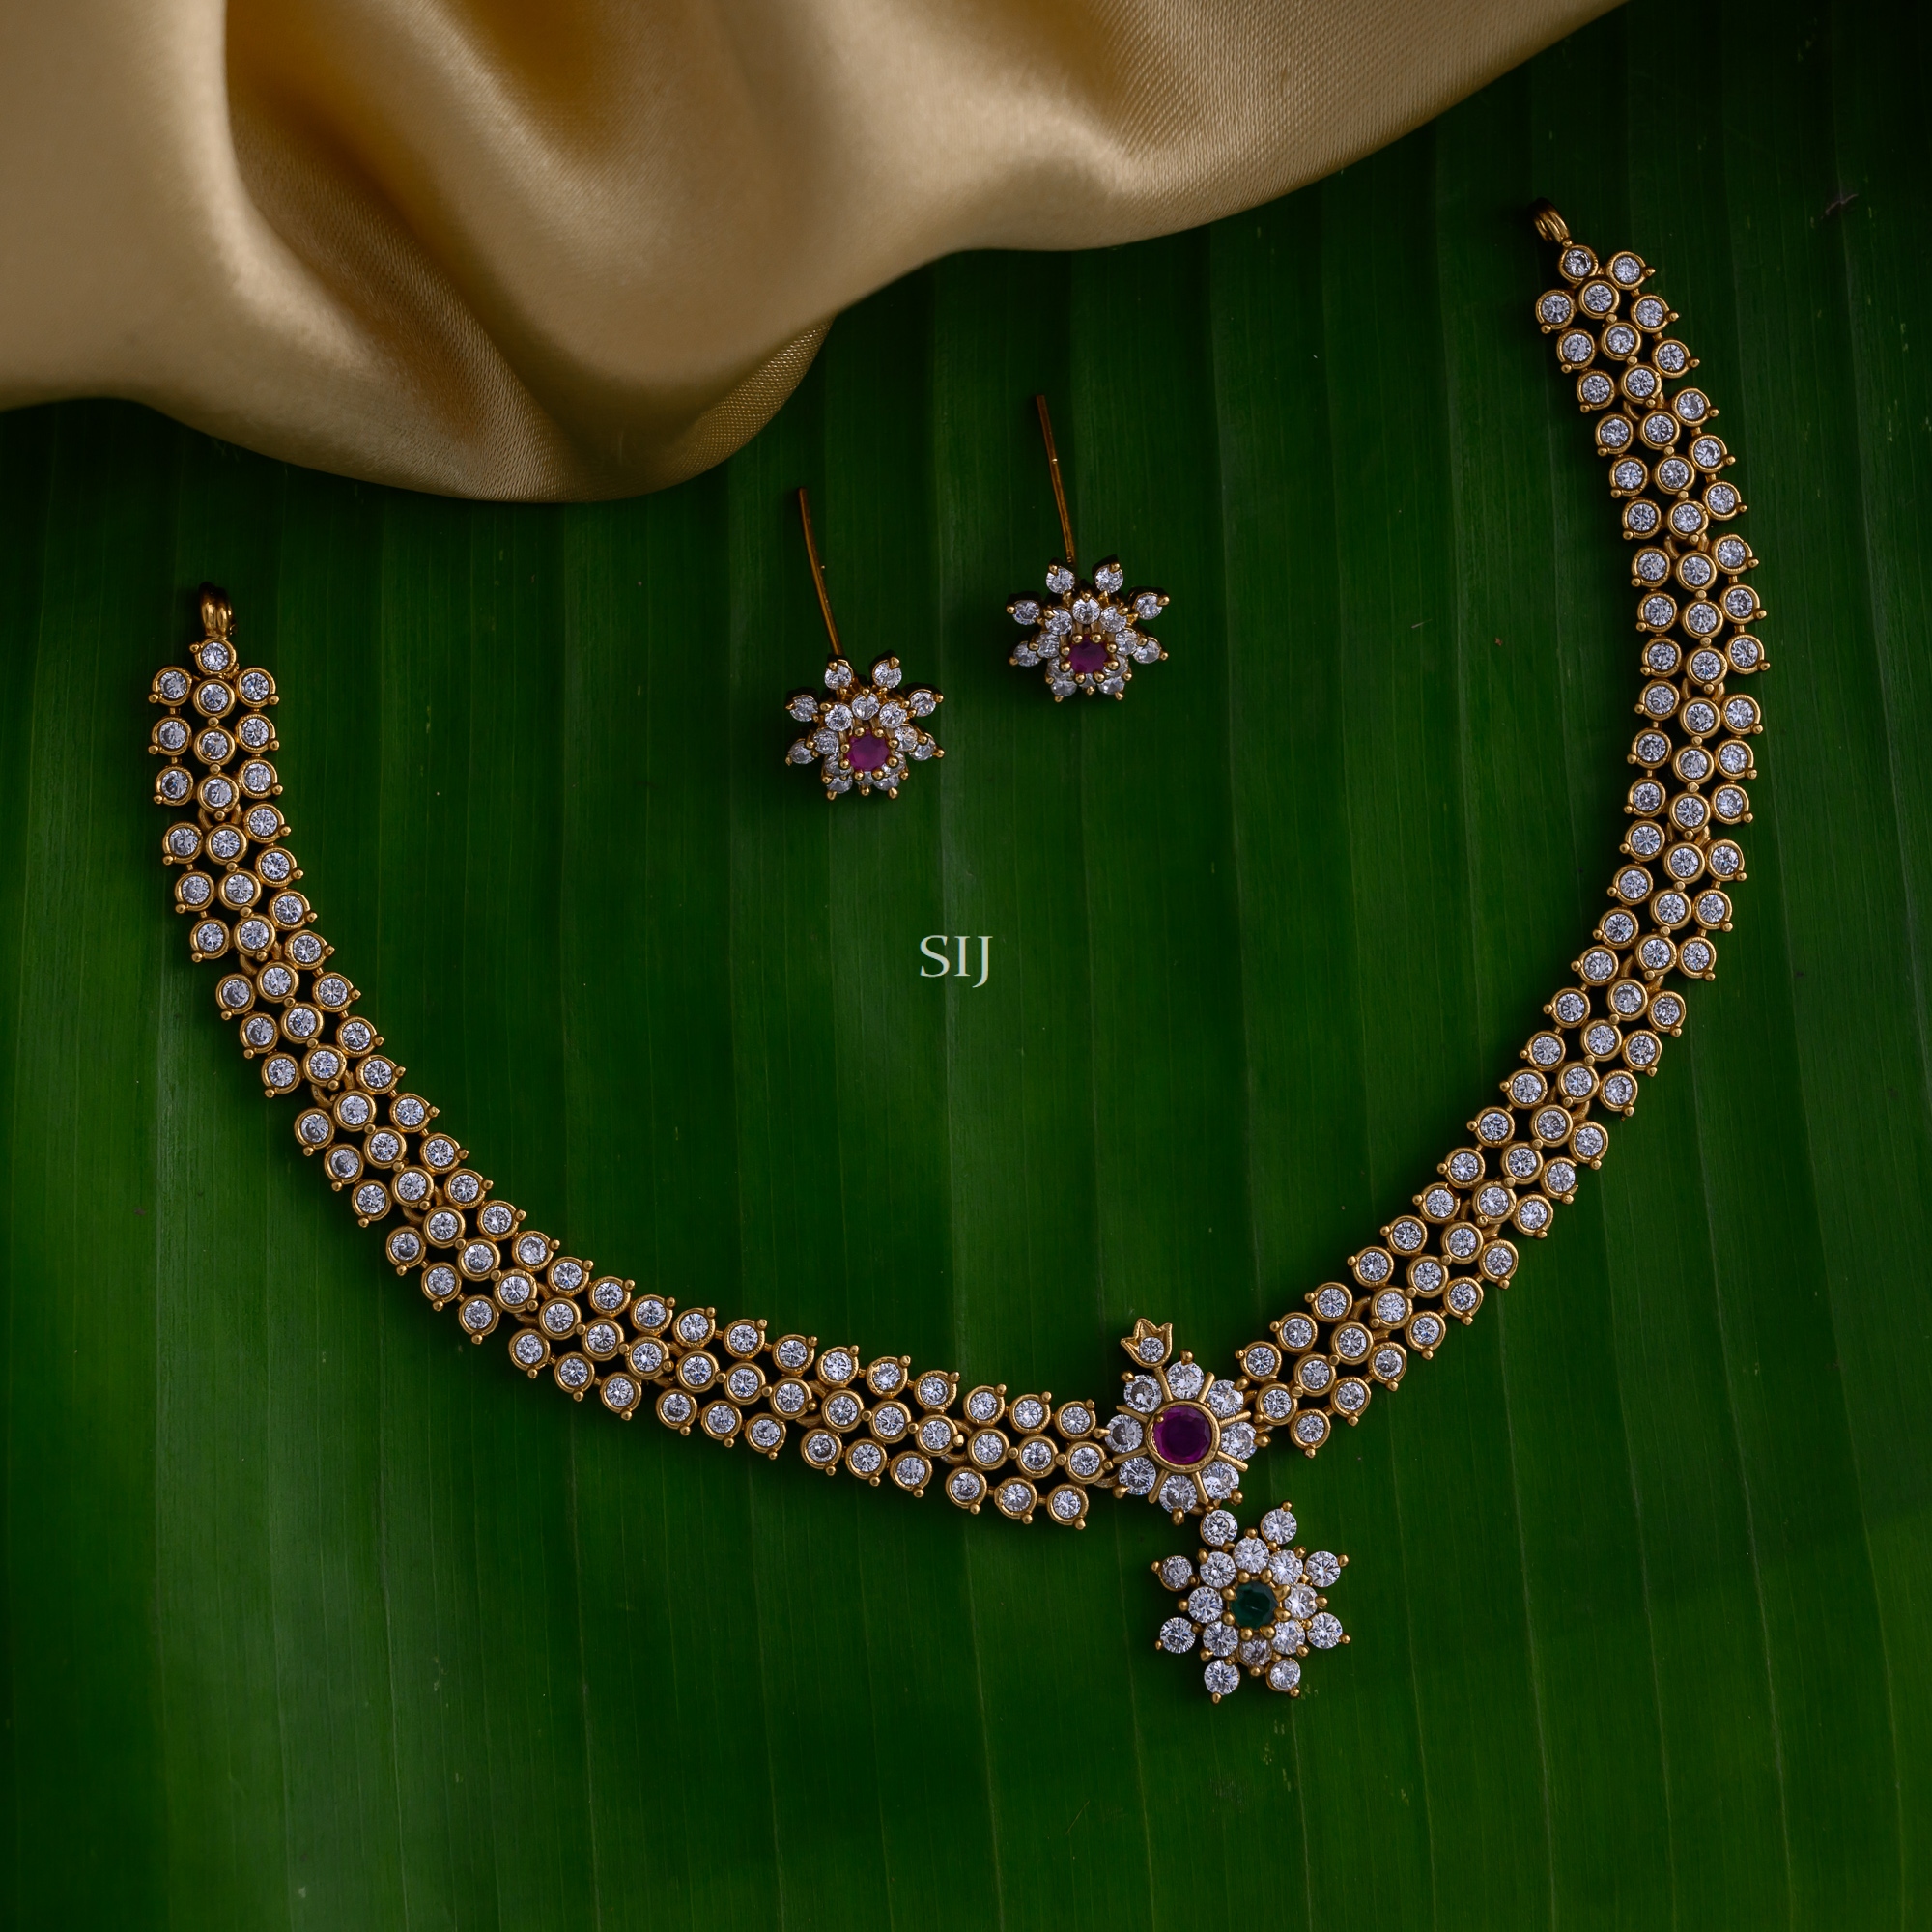 Artificial Flower Design Pendant with White Stones Necklace